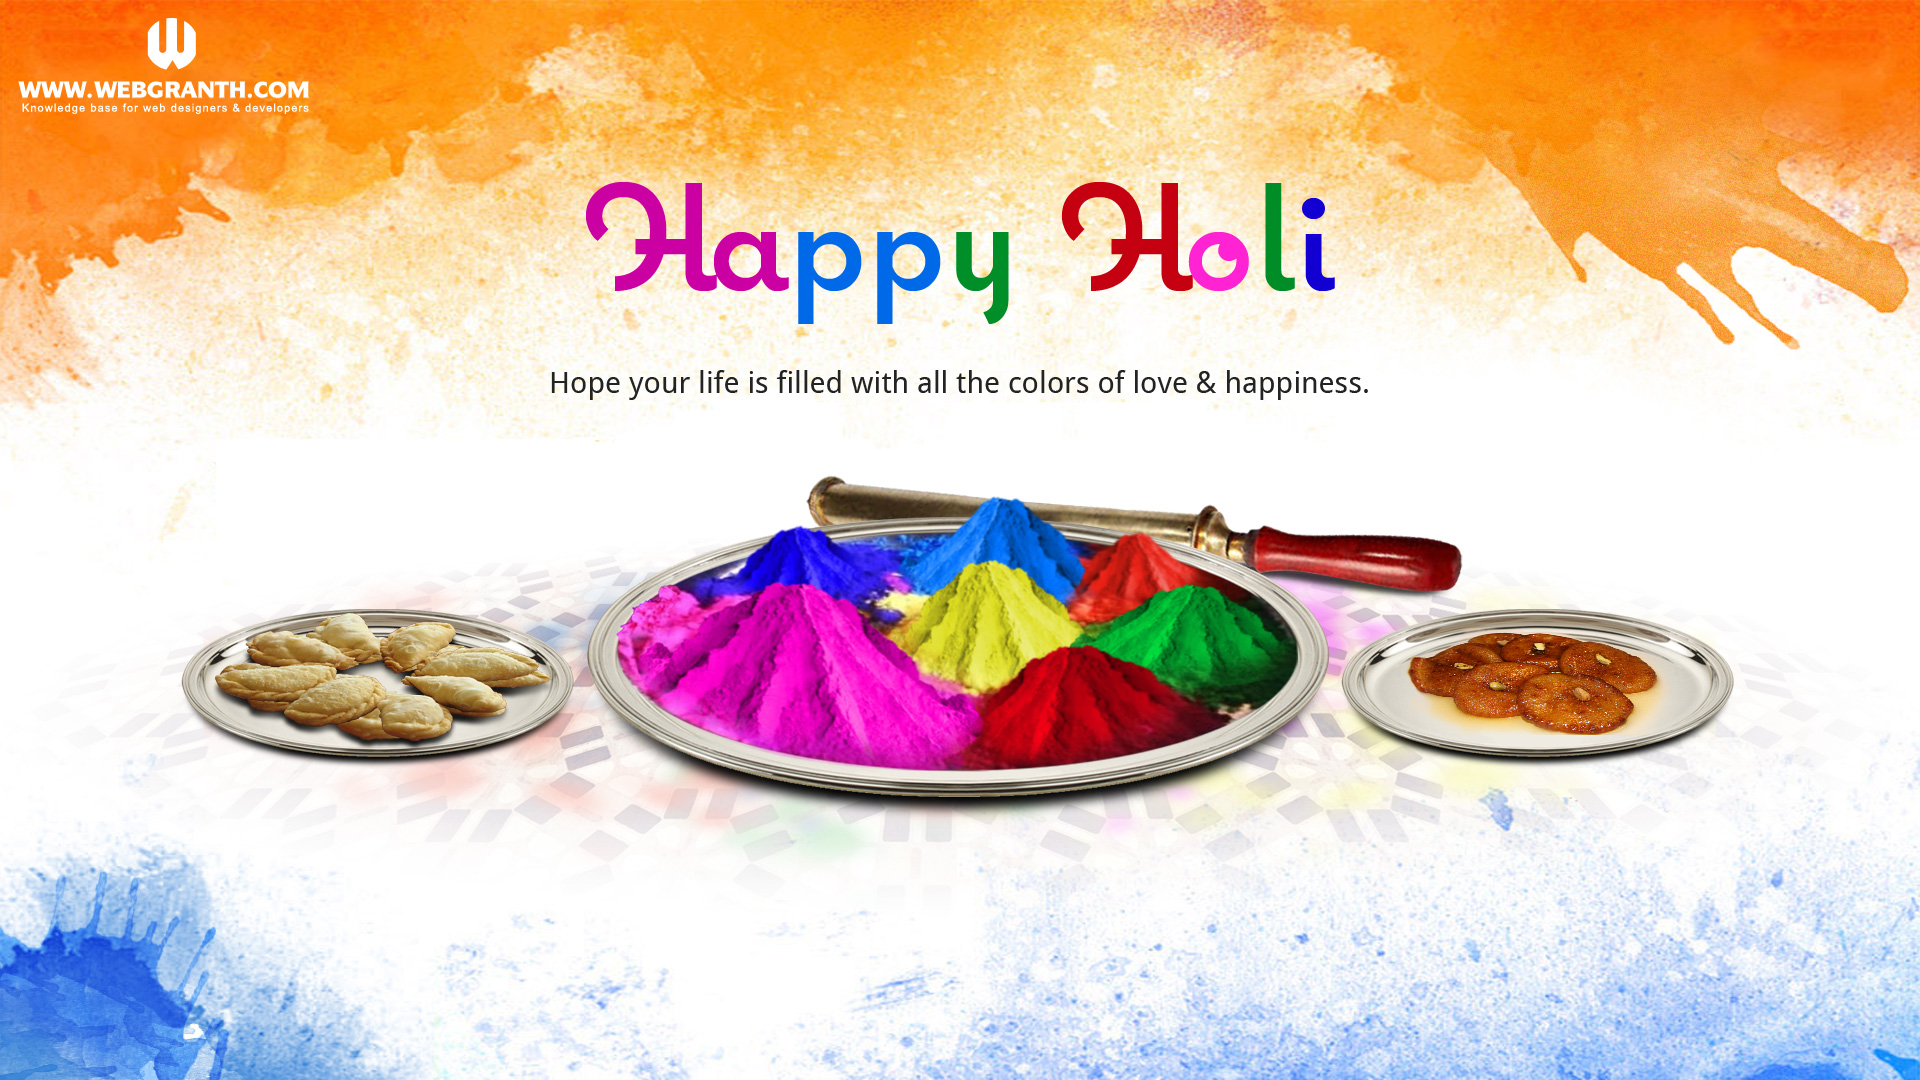 Happy Holi Wallpaper With March 2013 Calendar - Have A Safe Holi - HD Wallpaper 